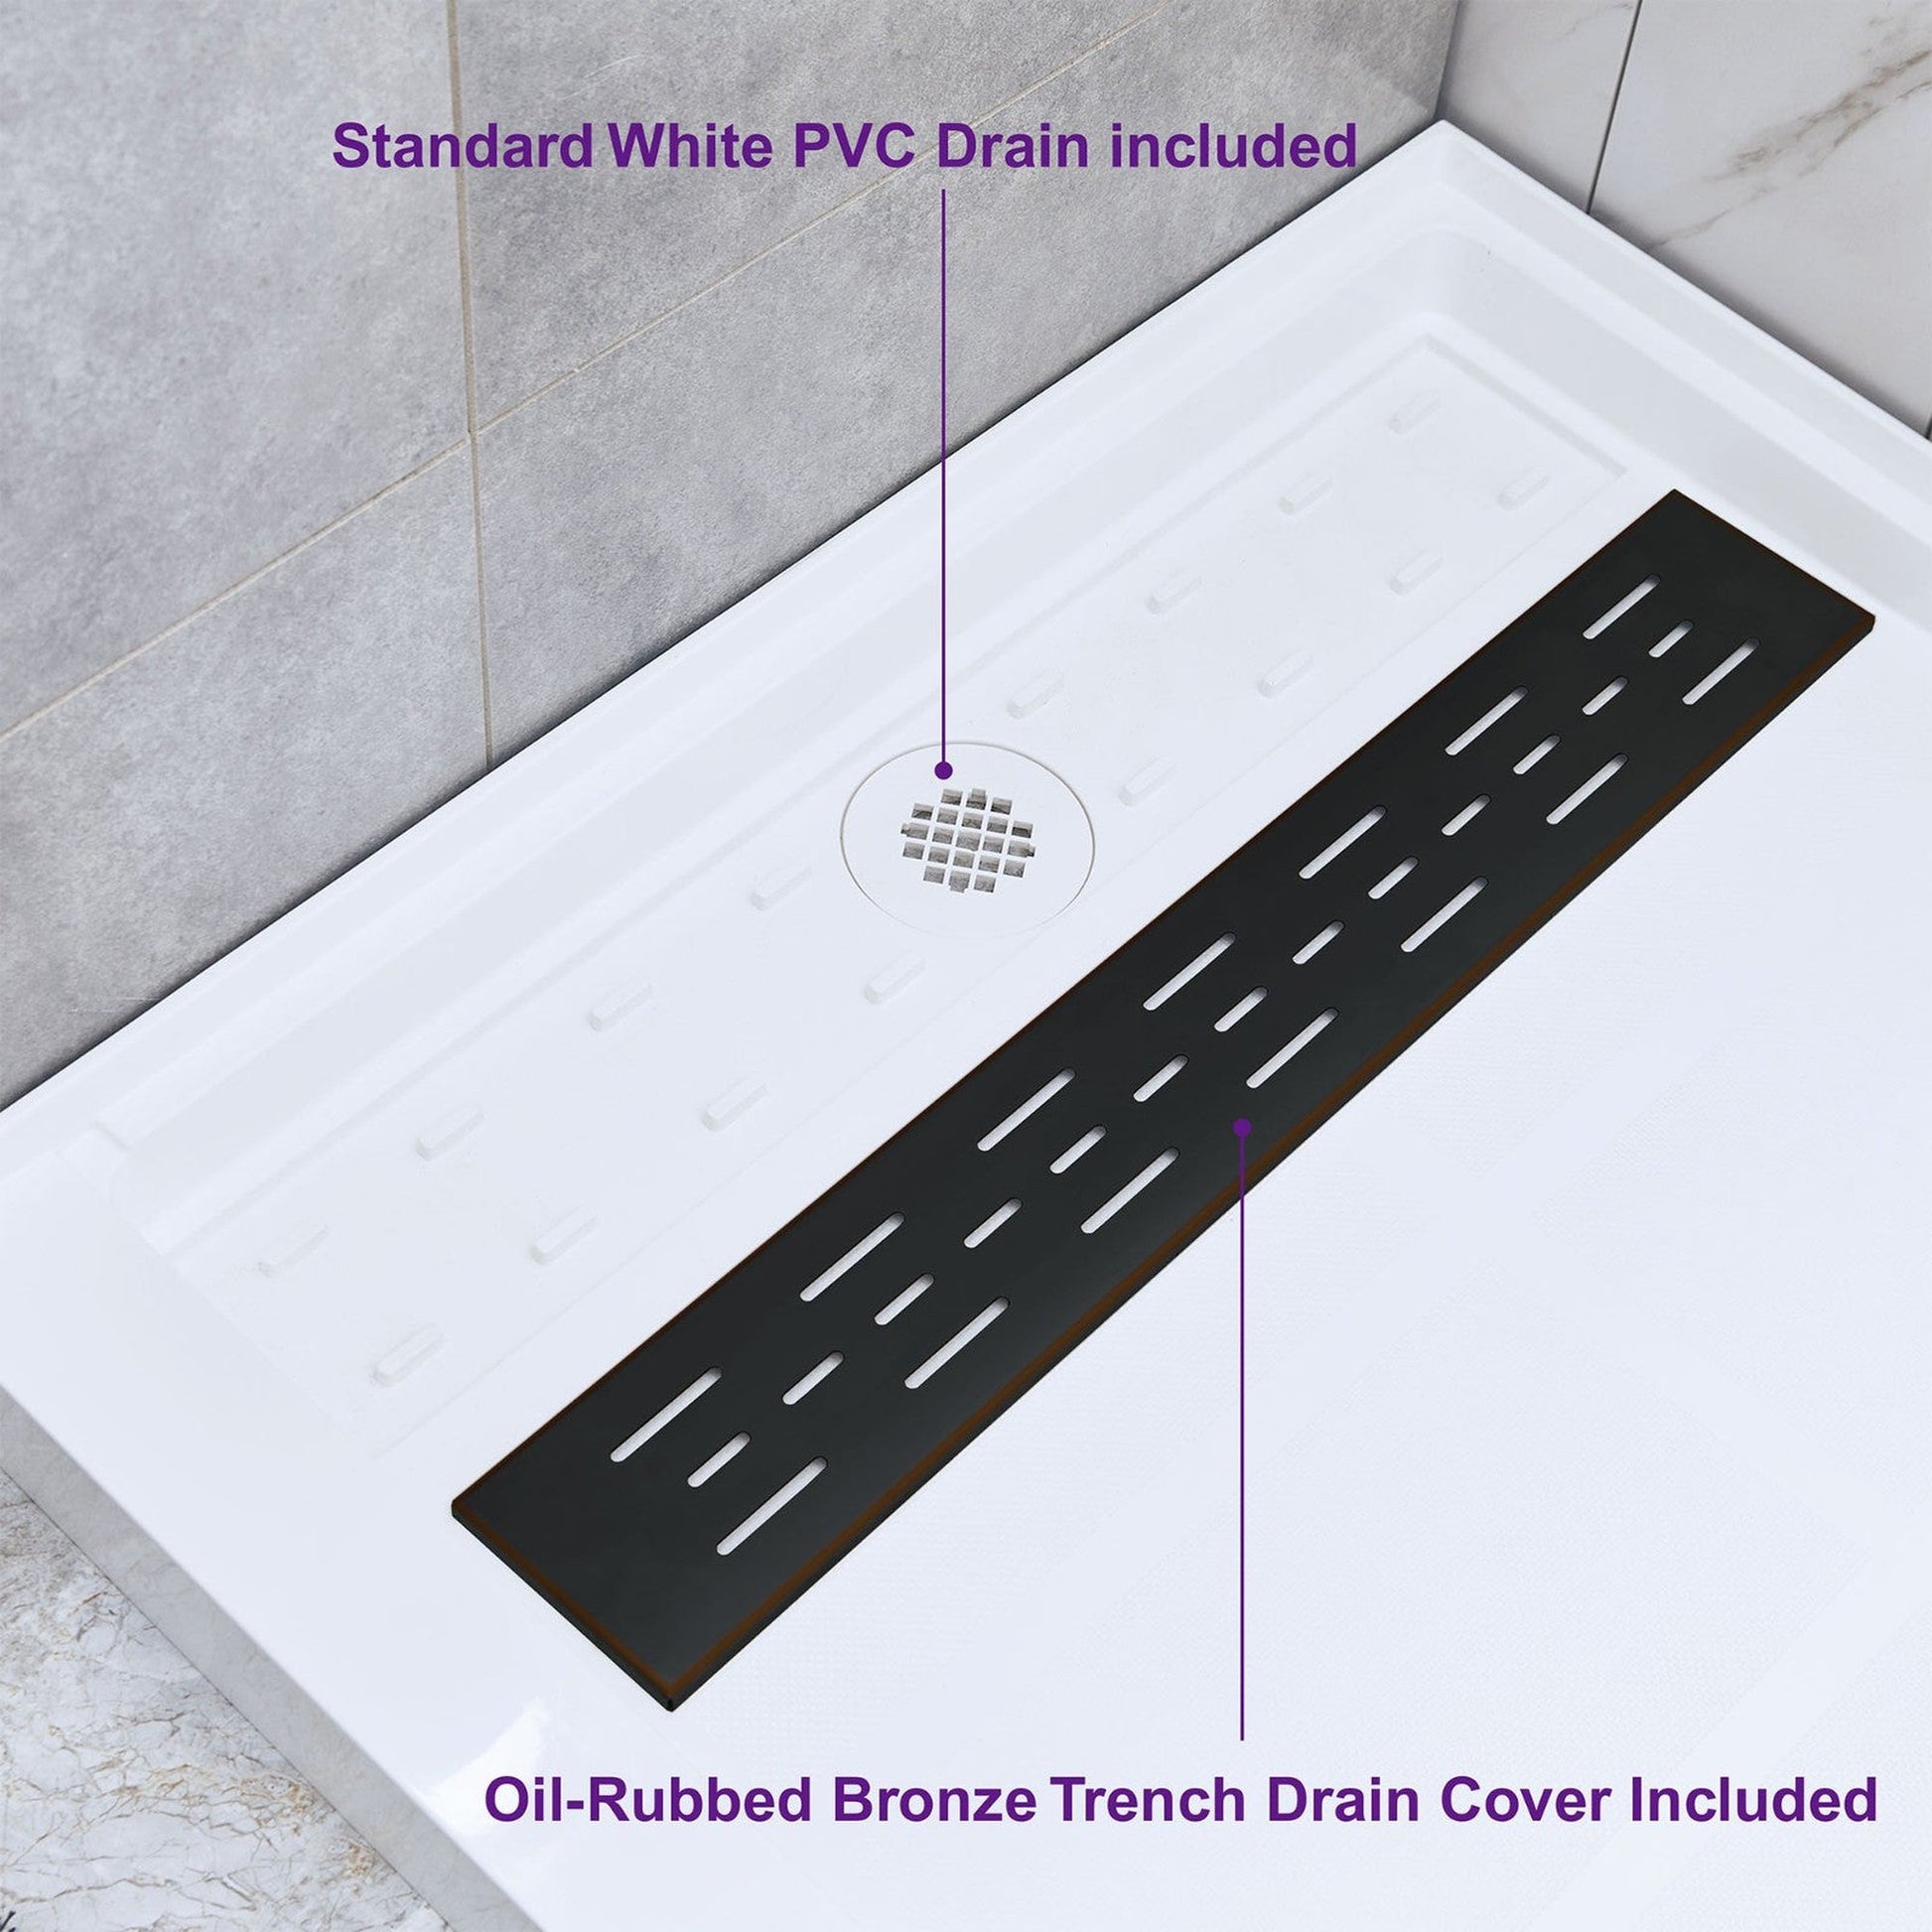 WoodBridge 60" x 34" White Solid Surface Shower Base Right Drain Location With Oil Rubbed Bronze Trench Drain Cover